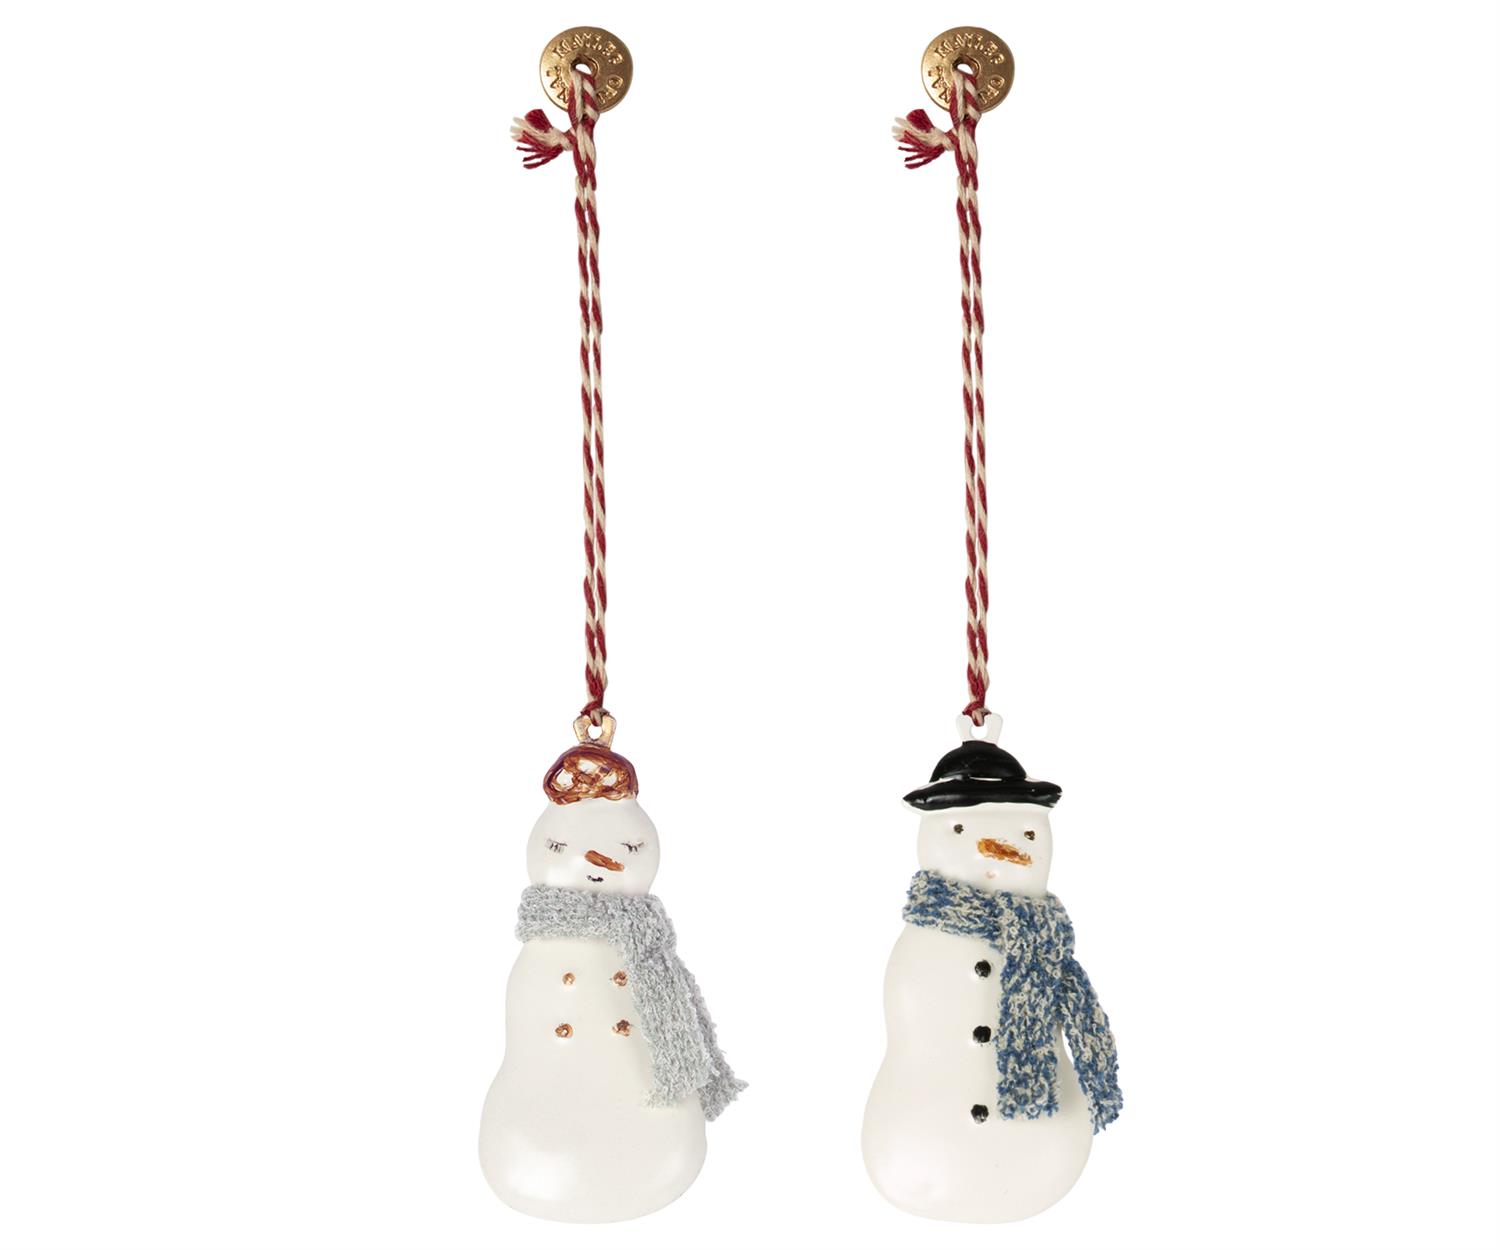 MAILEG Metal ornament, Snowman with grey scarf